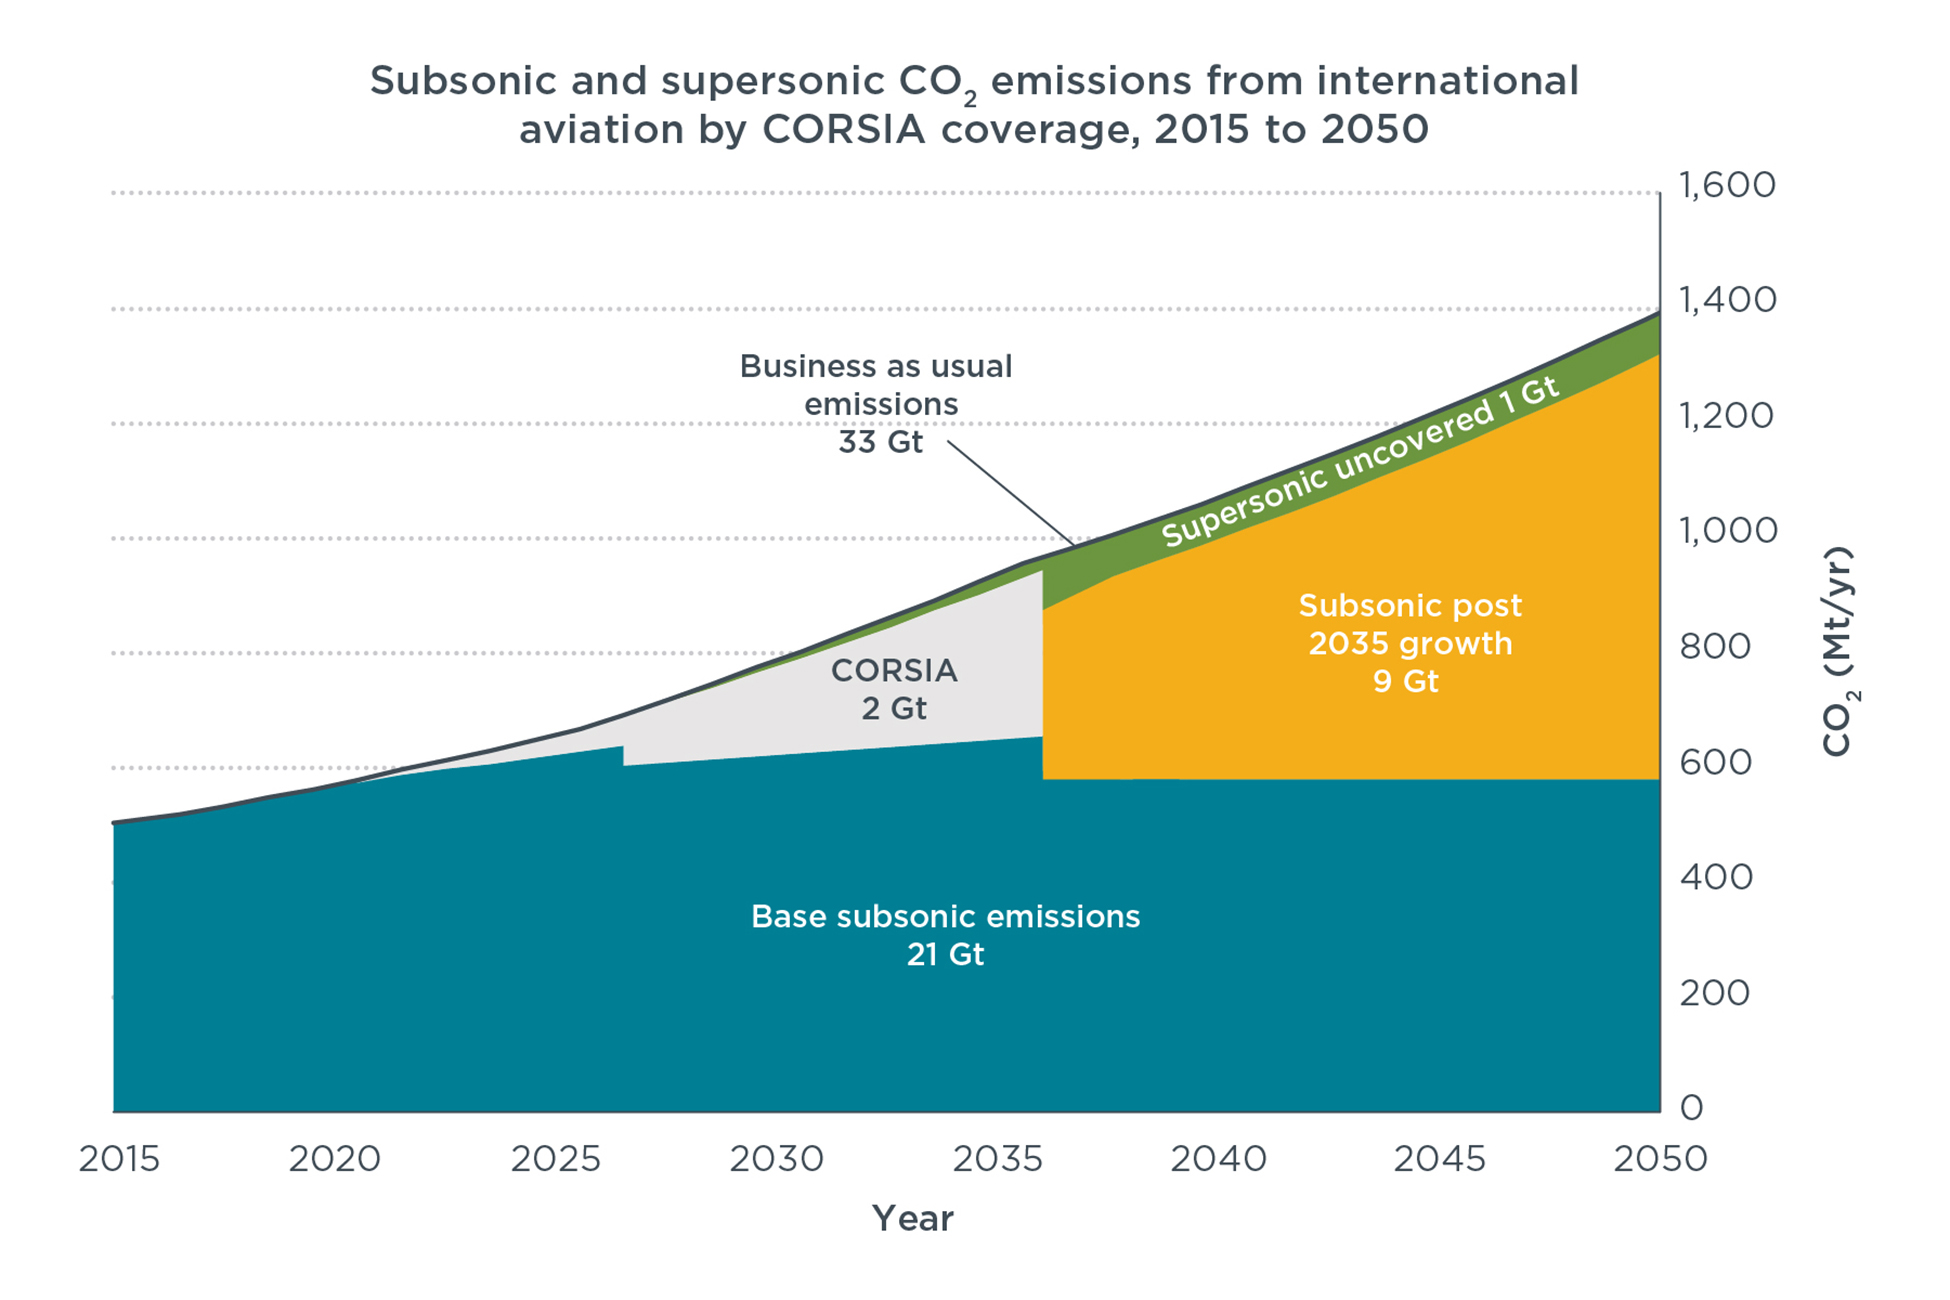 Chart of subsonic CO2 emissions from international aviation by CORSIA coverage, 2015-2020